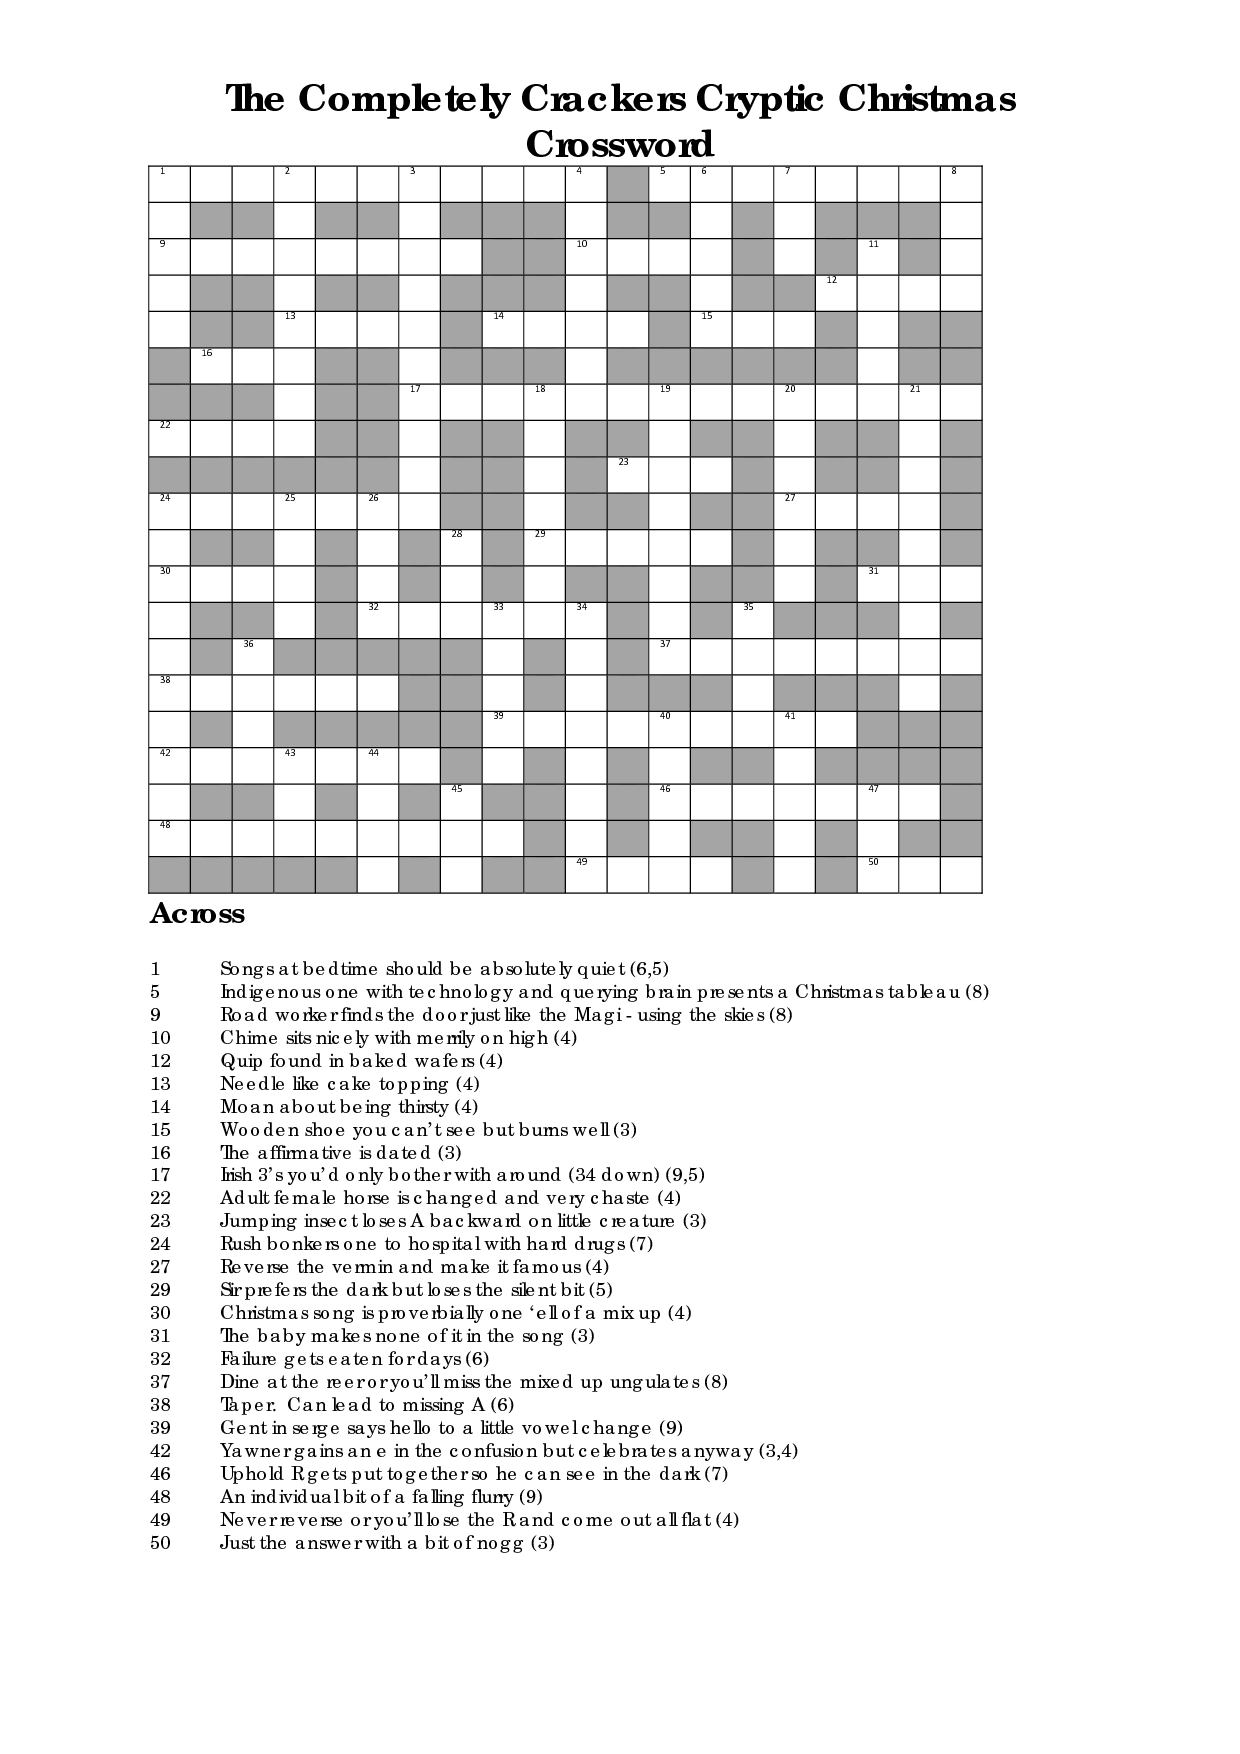 Christmas Crossword Puzzles To Print | The Completely Crackers - Cryptic Crossword Puzzles Printable Free